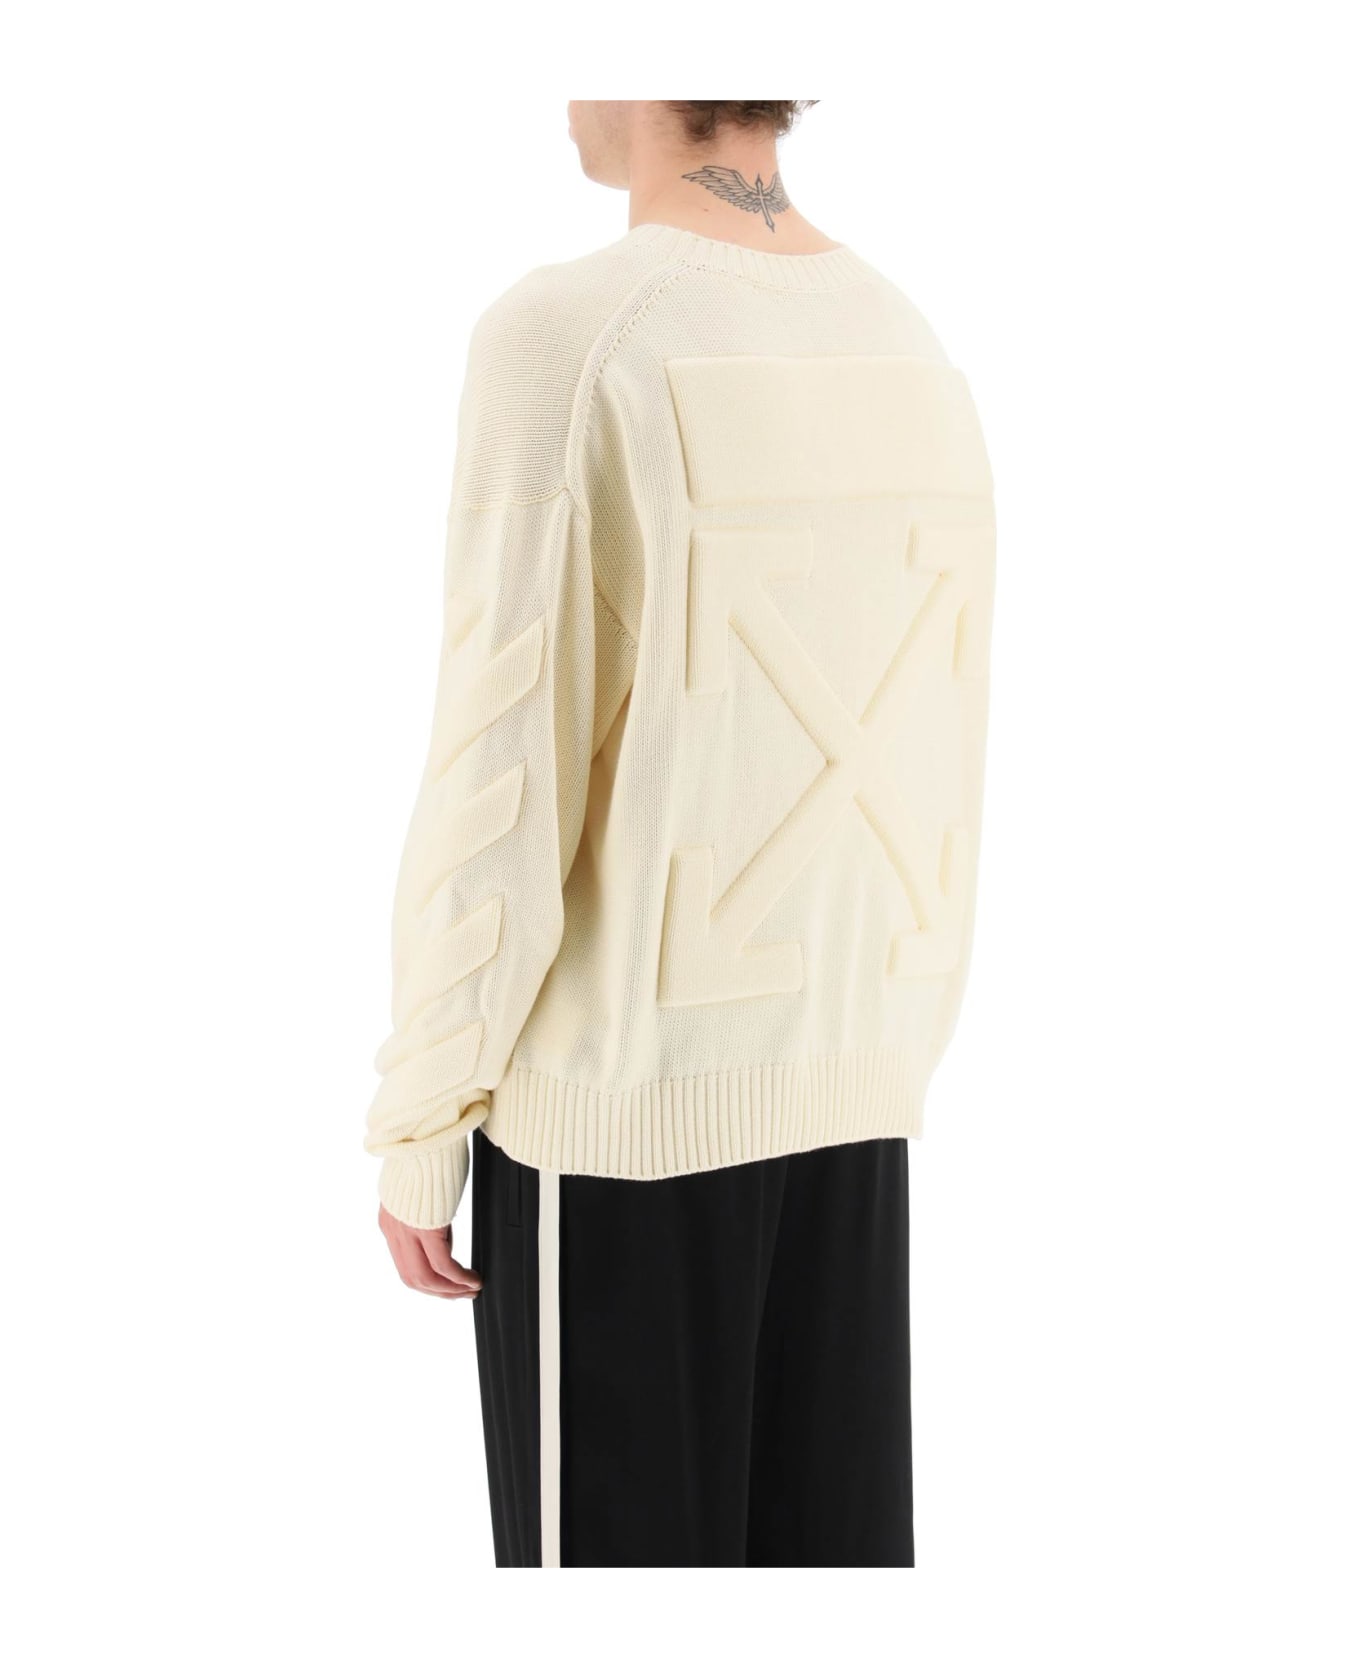 Off-White 3d Diag Knit Sweater - panna